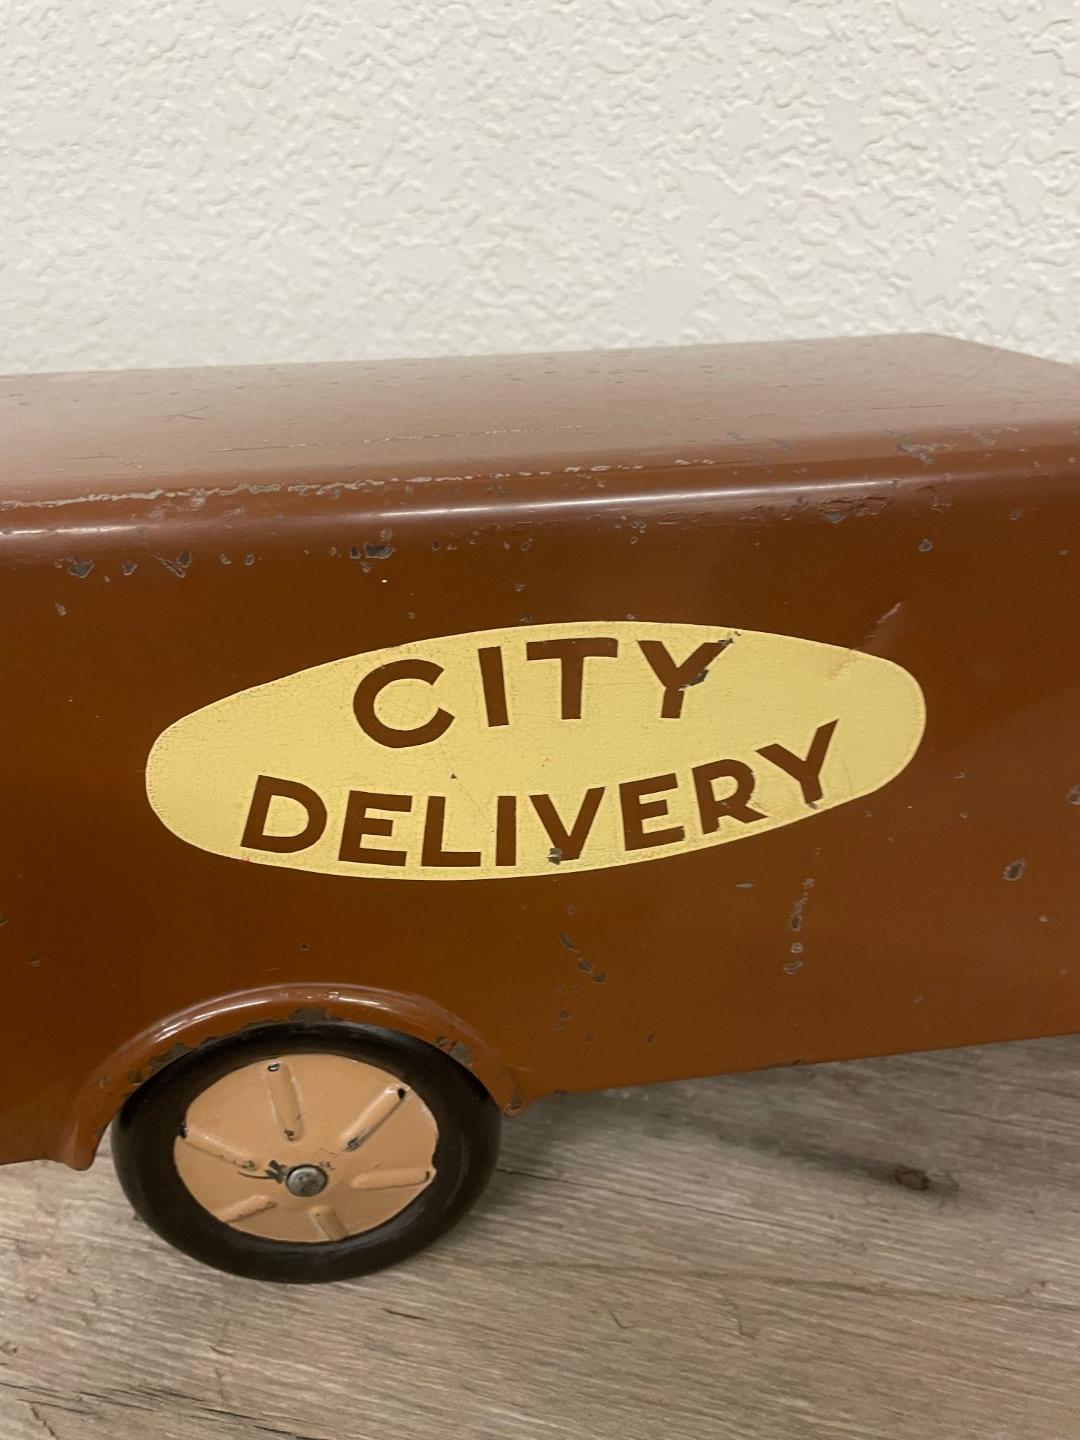 Steelcraft City Delivery Box Truck original pressed steel